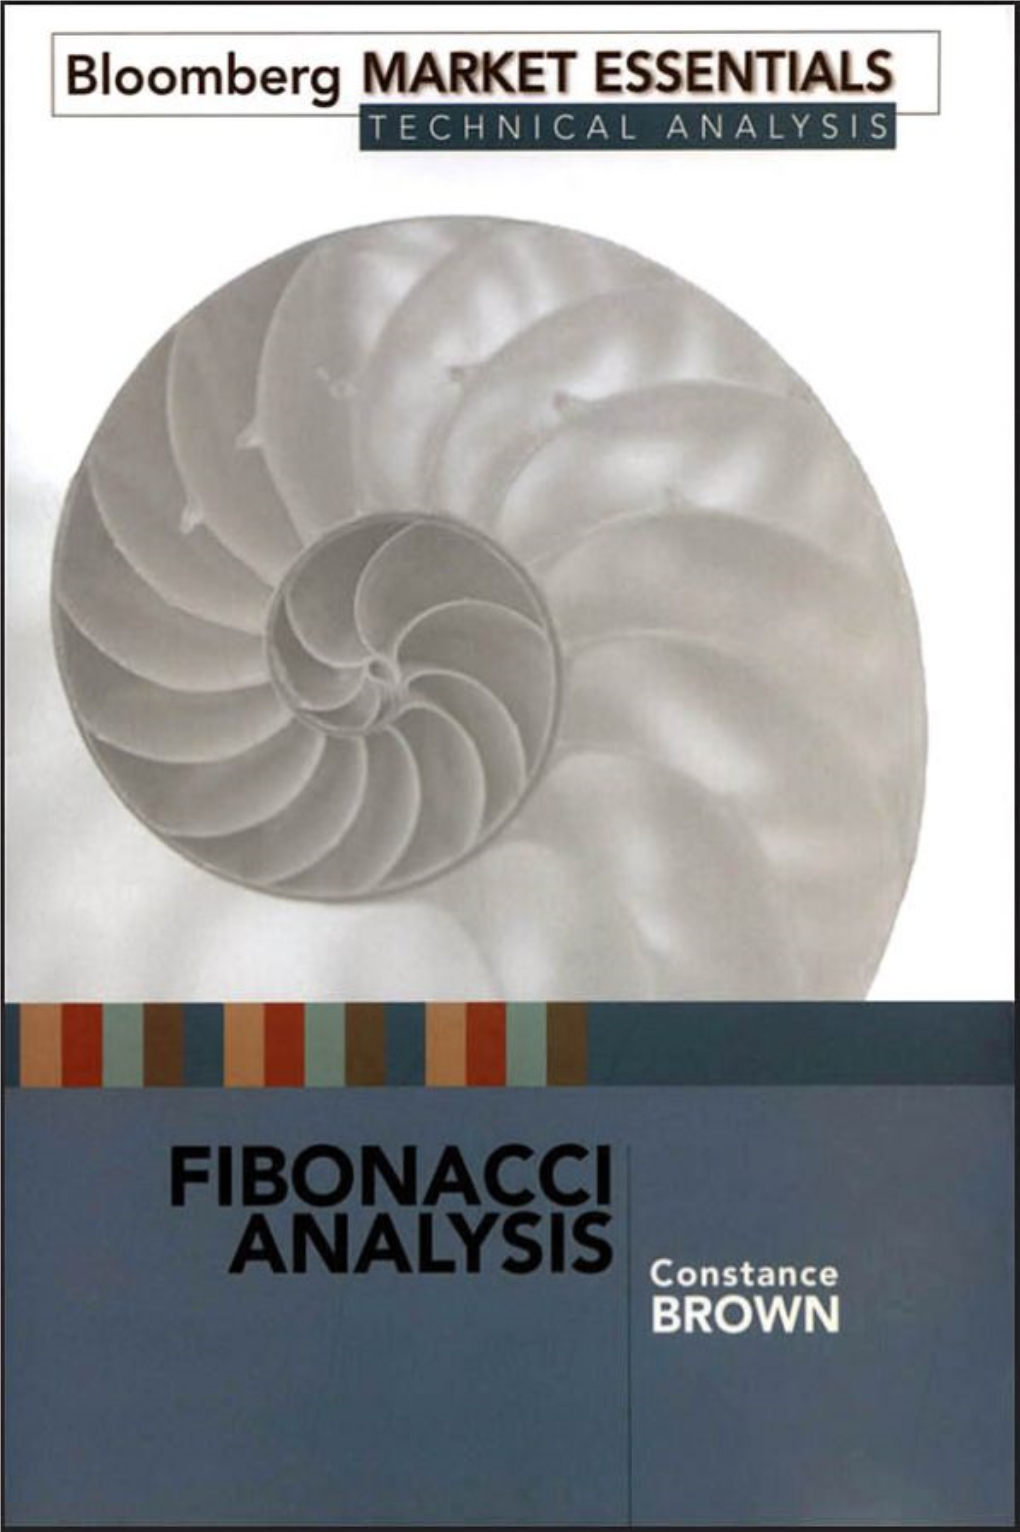 FIBONACCI ANALYSIS Related Titles Also Available from Bloomberg Press